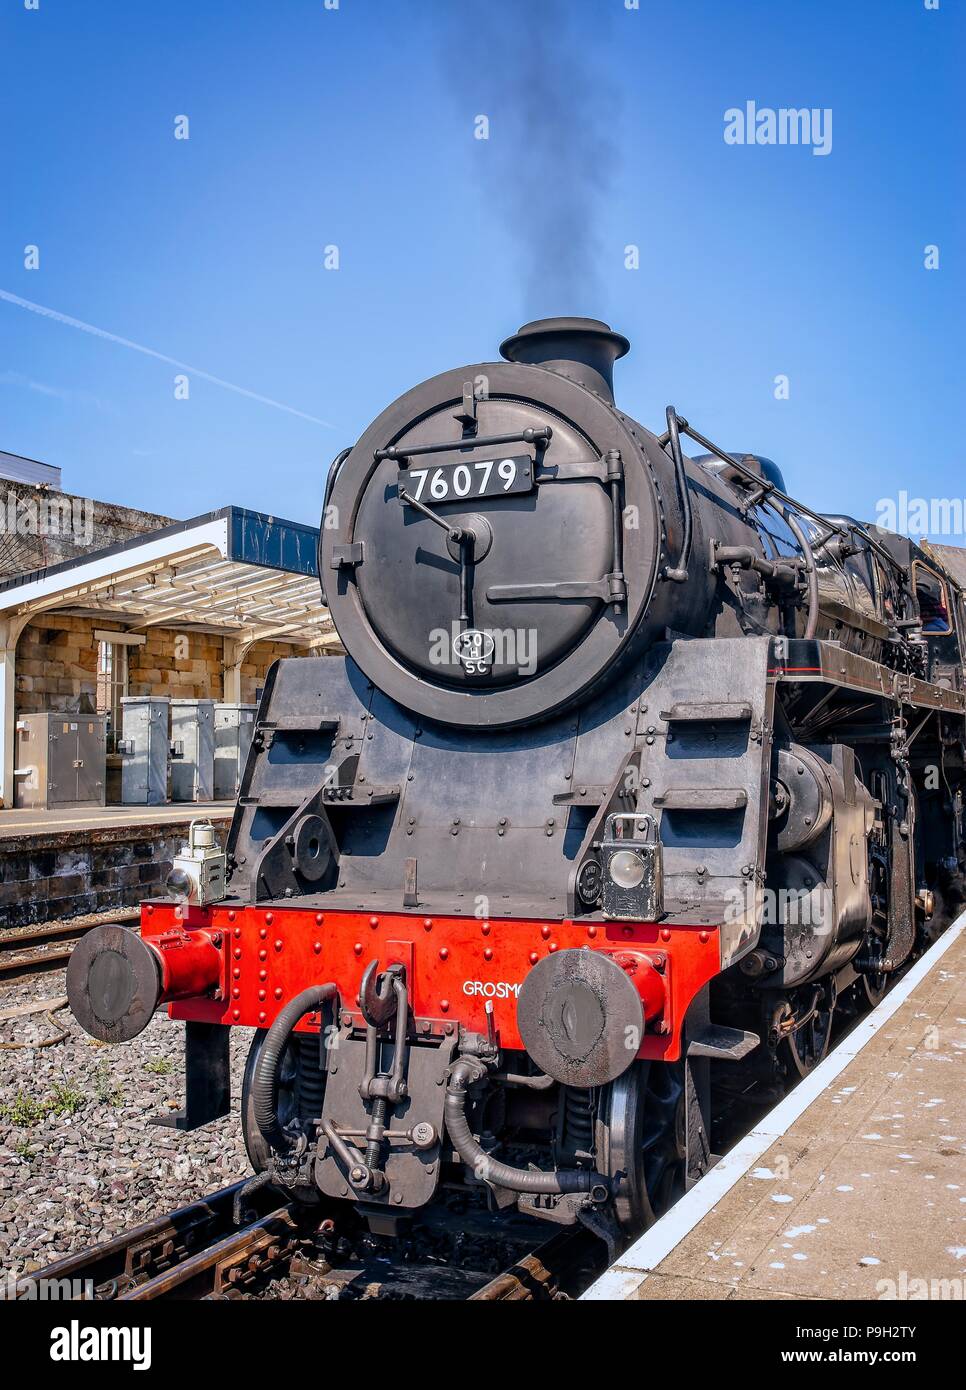 An old steam locomotive of the North Yorkshire Moors Railway stands in Whitby station.  Picking up steam, it gets ready to depart. Stock Photo